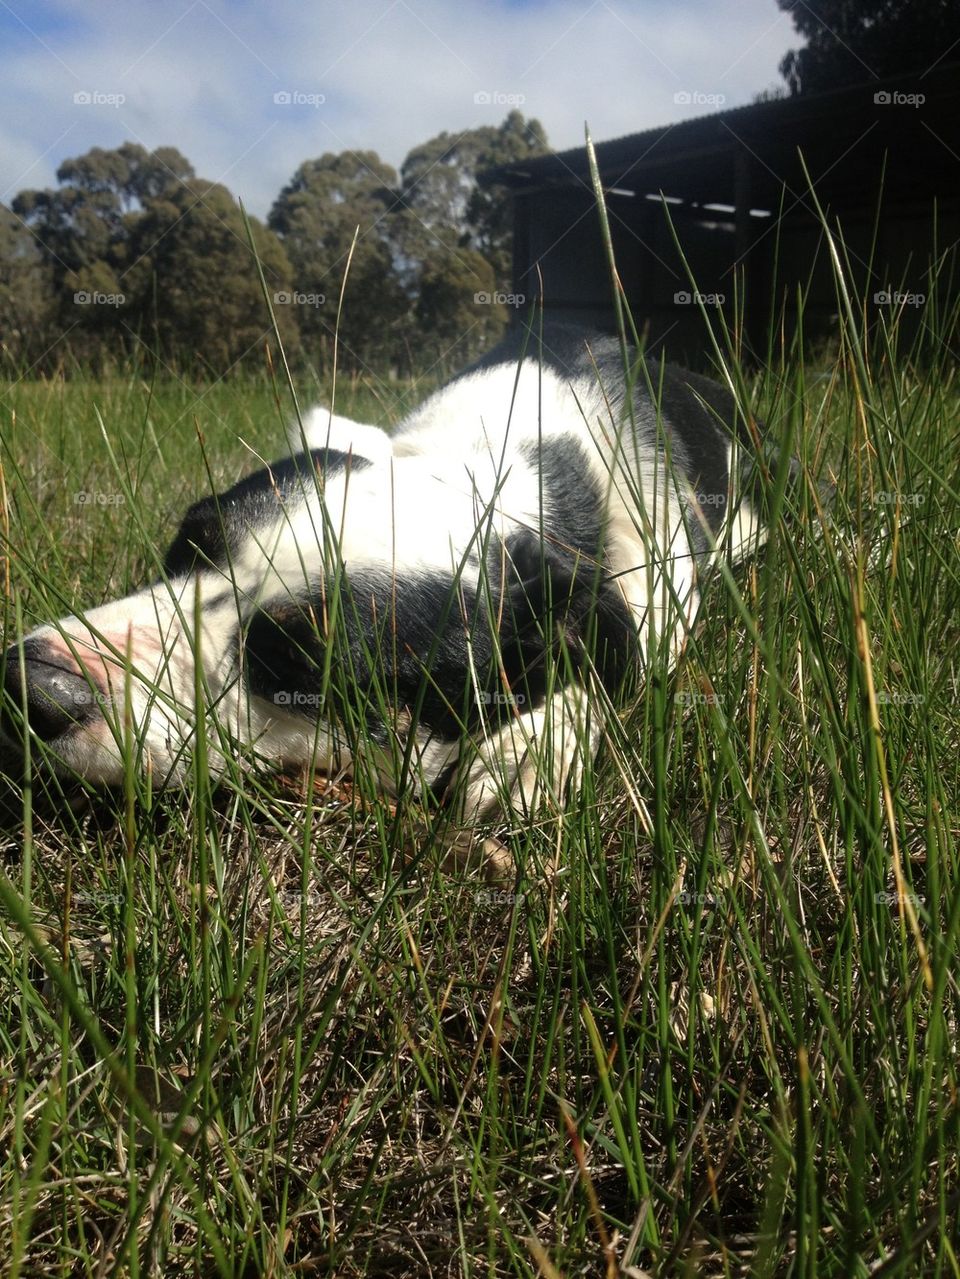 Charlie In the grass